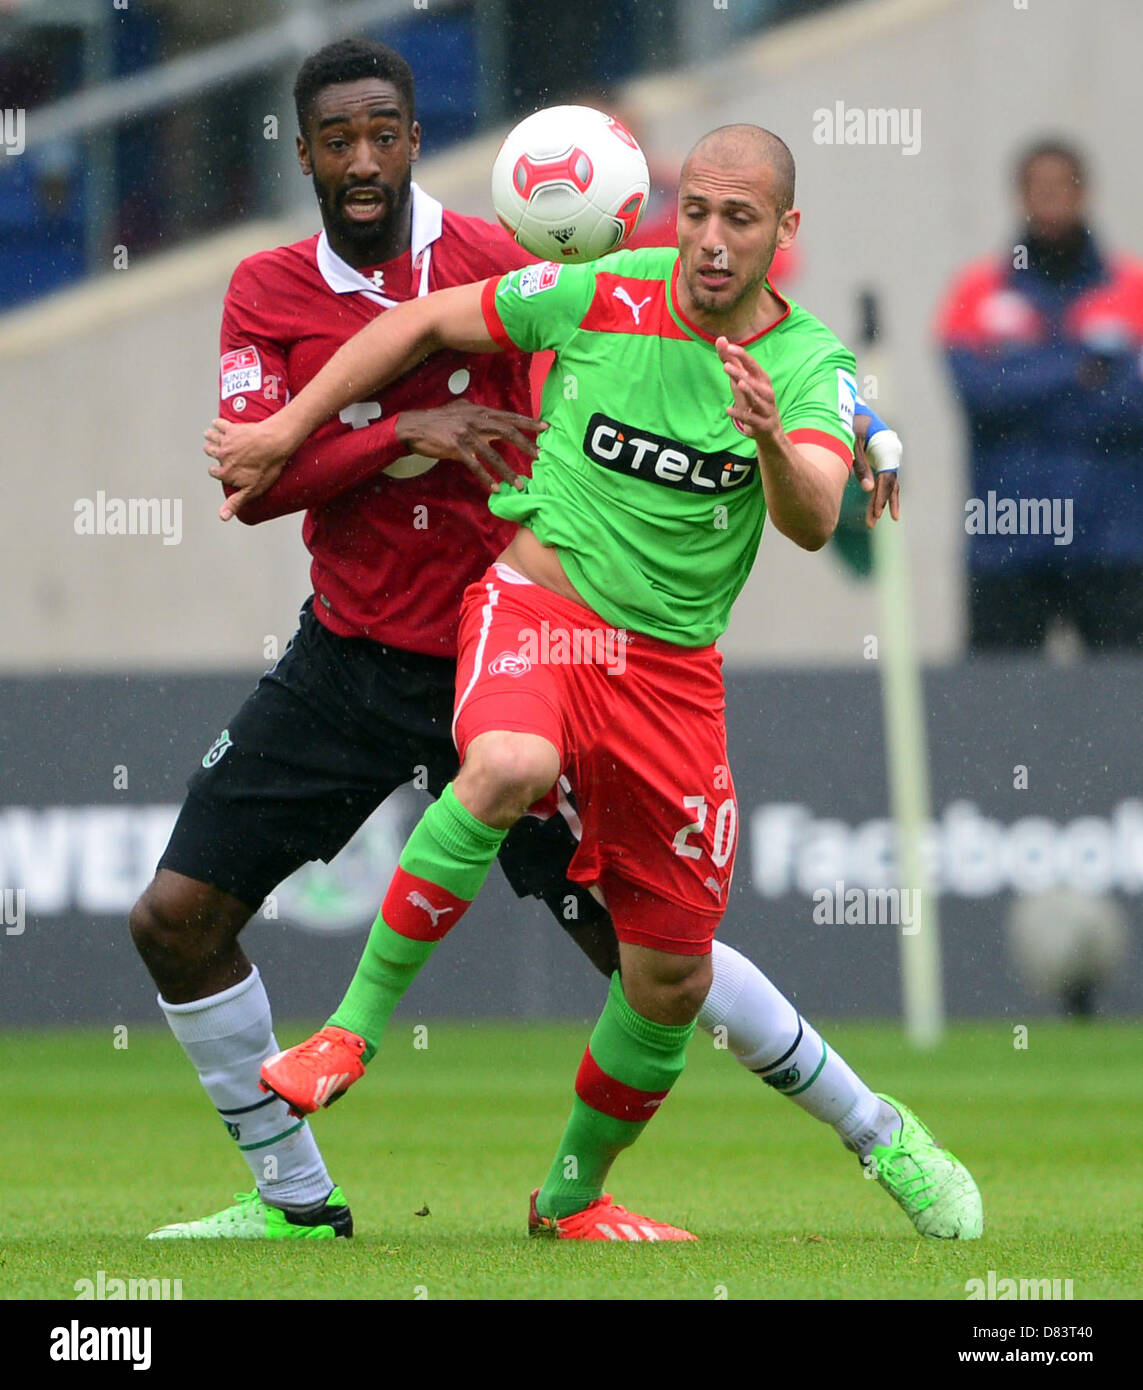 Hanover's Johan Djourou (L) vies for the ball with Duesseldorf's Dani Schahin during the Bundesliga soccer match between Hanover 96 and Fortuna Duesseldorf at AWD Arena in Hanover, Germany, 18 May 2013. Photo: PETER STEFFEN (ATTENTION: EMBARGO CONDITIONS! The DFL permits the further utilisation of up to 15 pictures only (no sequntial pictures or video-similar series of pictures allowed) via the internet and online media during the match (including halftime), taken from inside the stadium and/or prior to the start of the match. The DFL permits the unrestricted transmission of digitised recordin Stock Photo